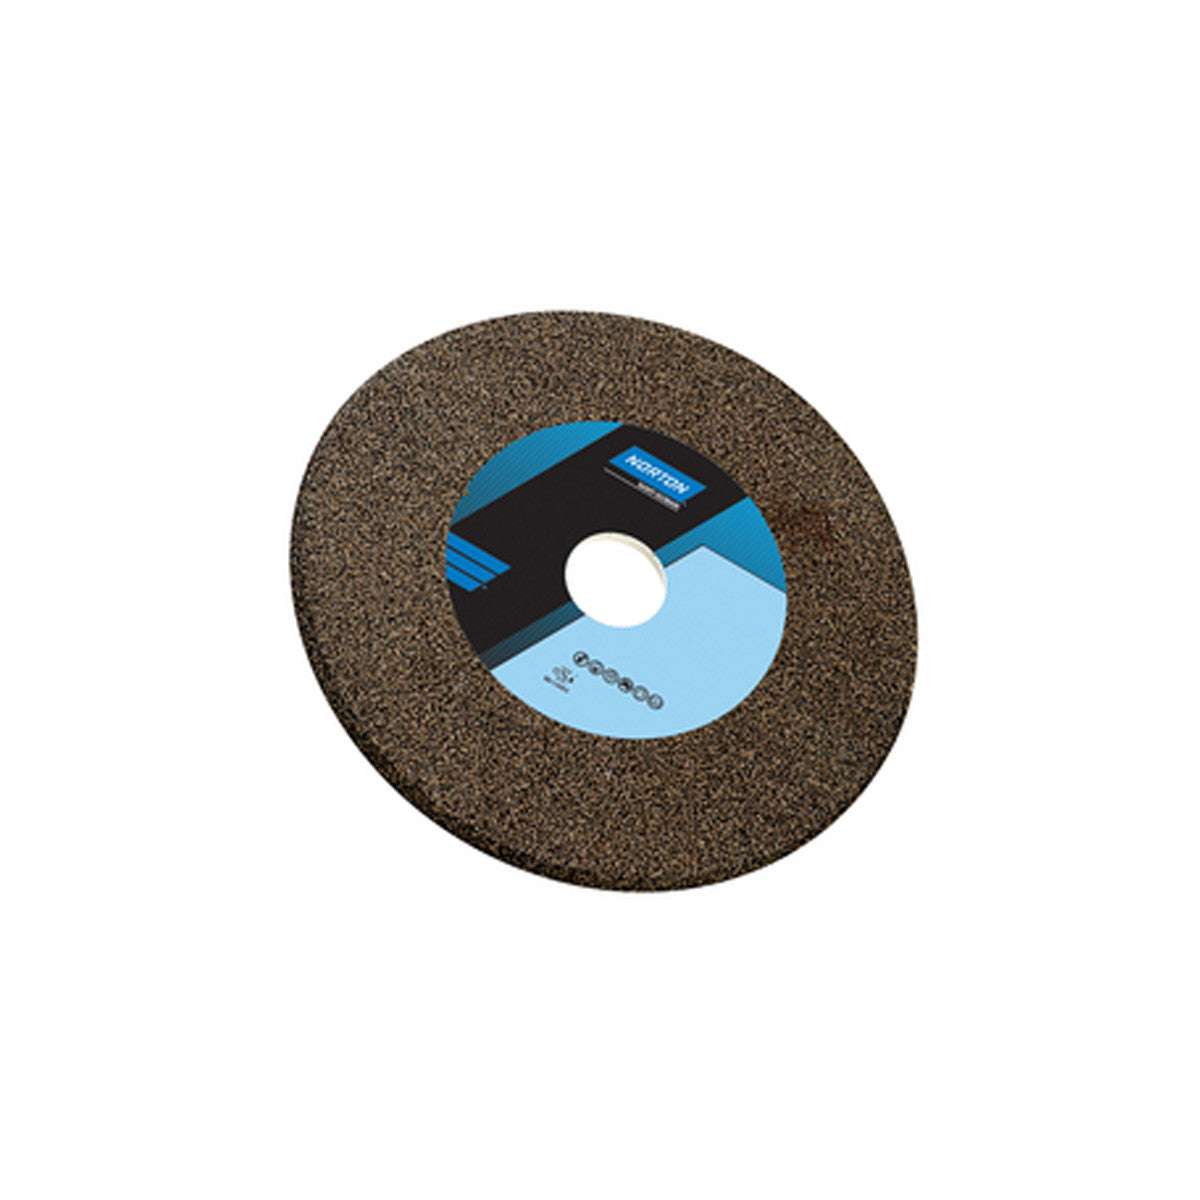 Conventional vitrified grinding wheel s.01 200X20X32 A46NVS - Norton